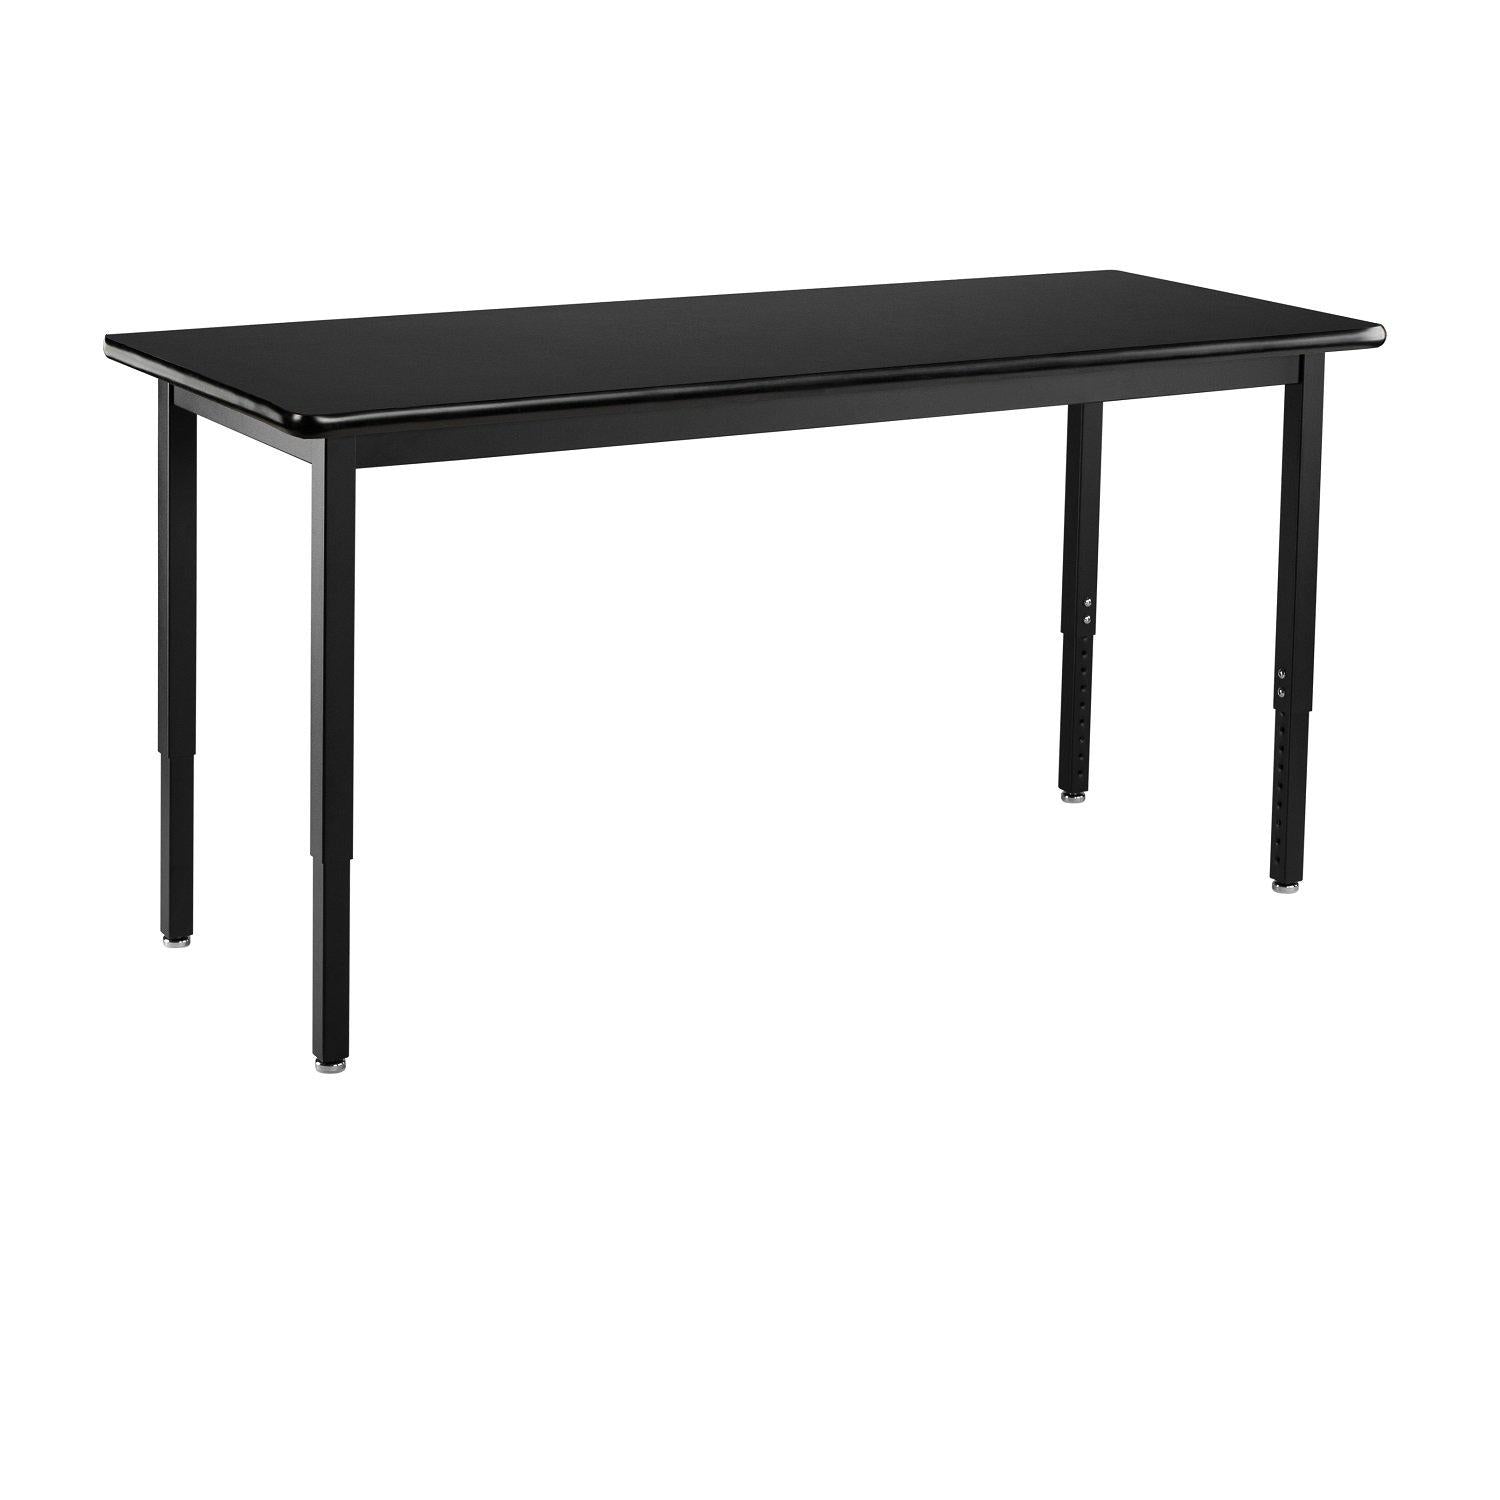 Heavy-Duty Height-Adjustable Utility Table, Black Frame, 30" x 42", High-Pressure Laminate Top with T-Mold Edge